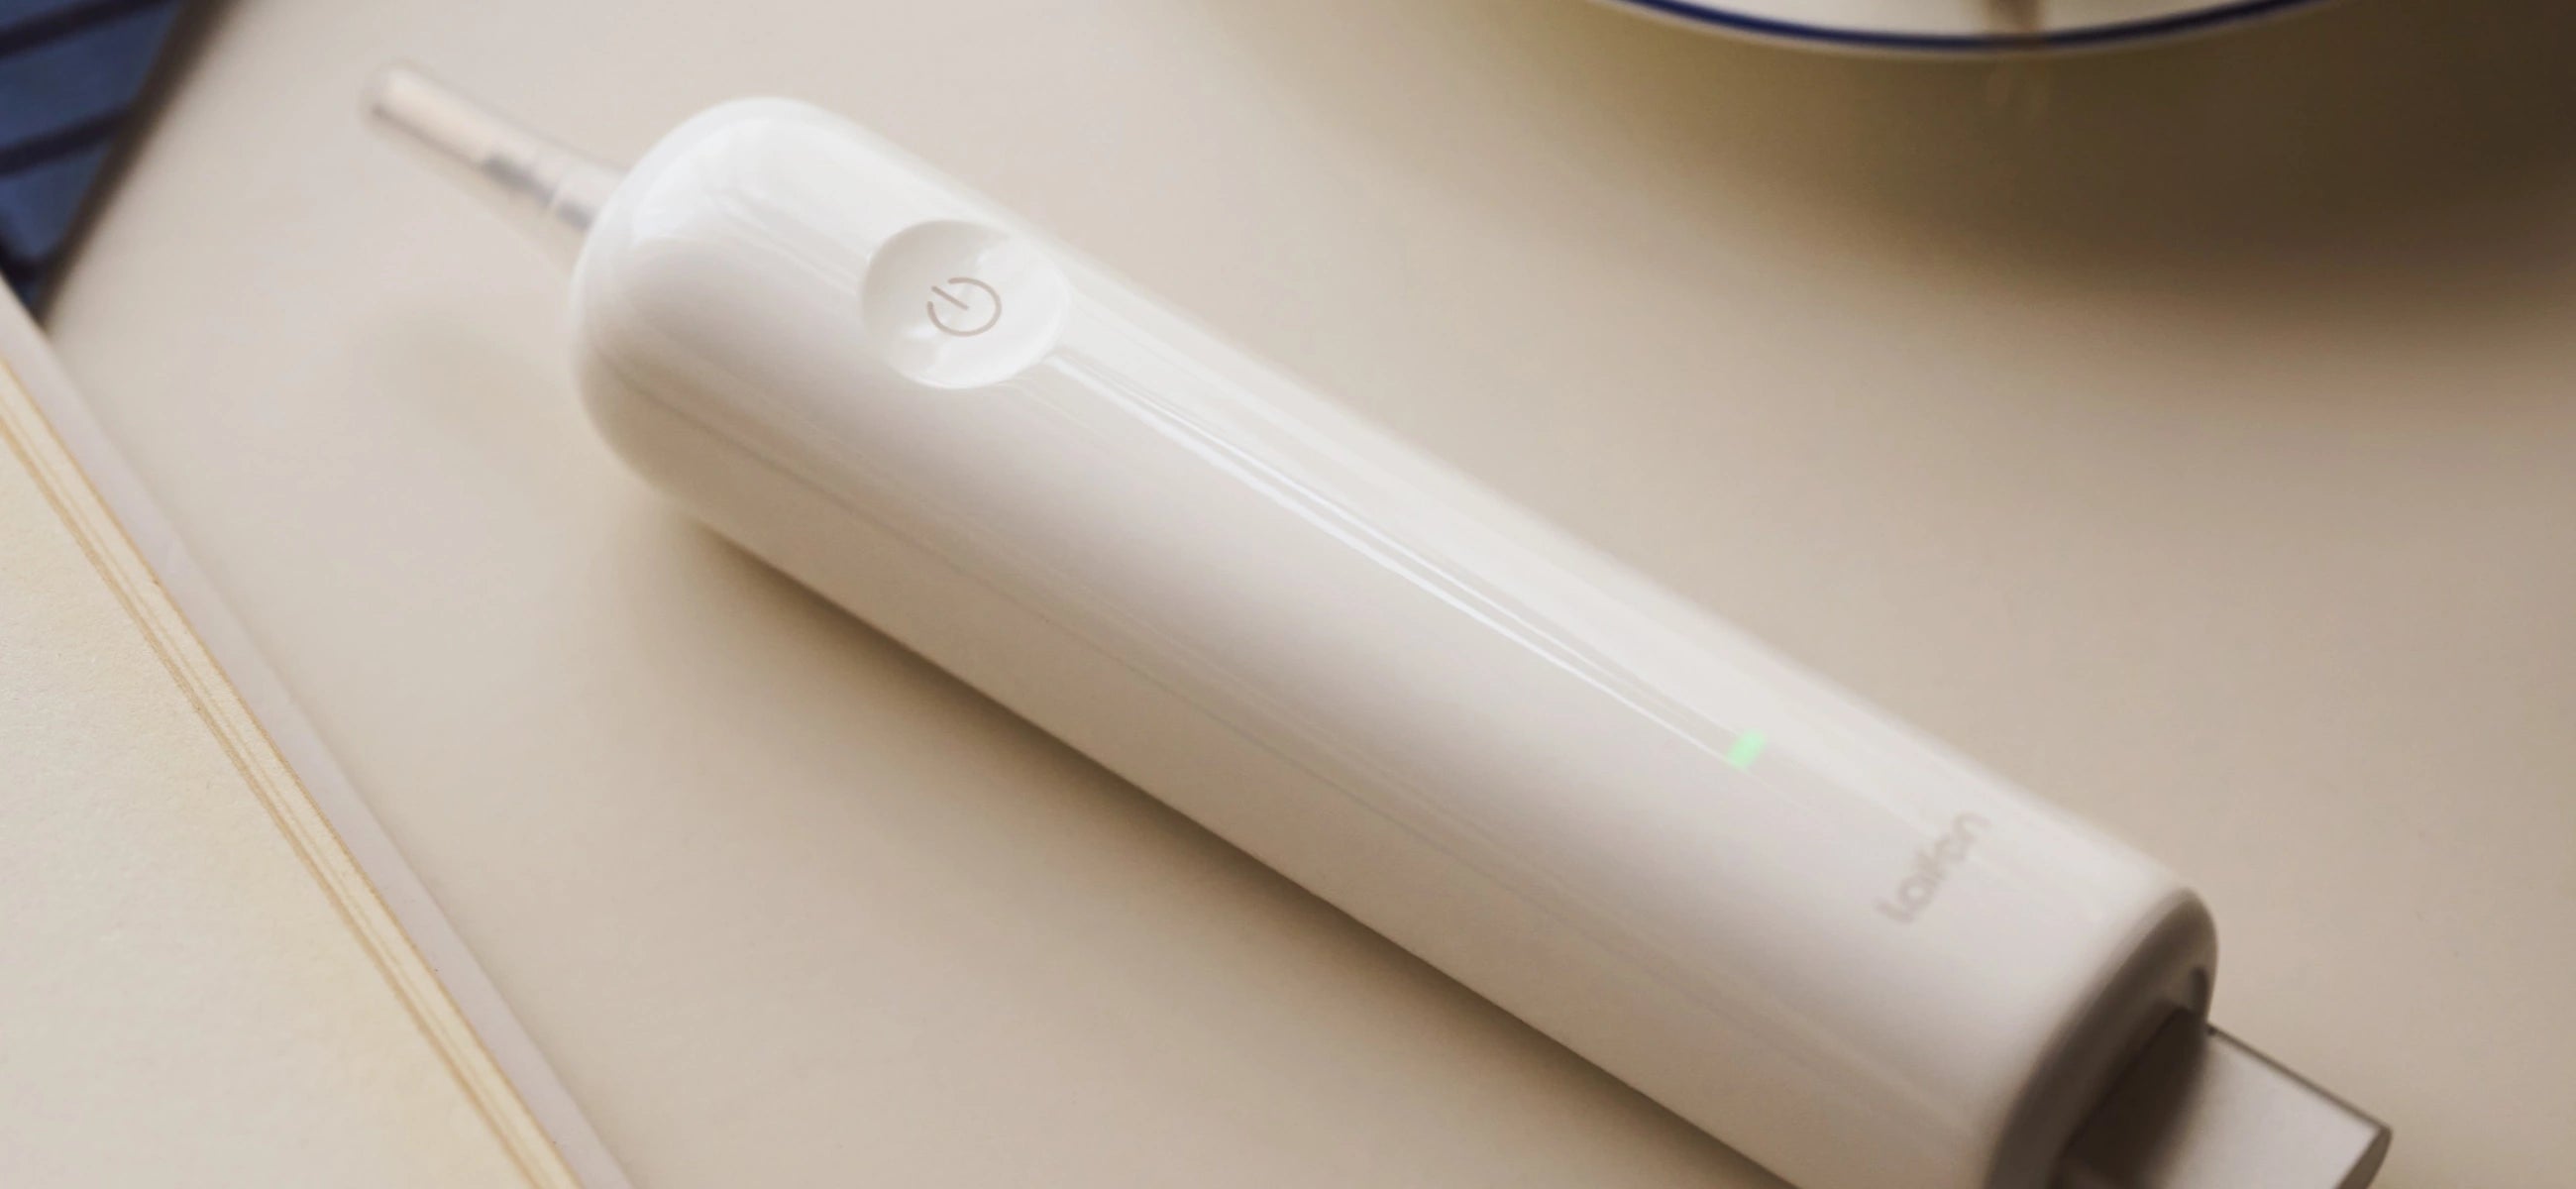 Is a rotating electric toothbrush better? Advantages and disadvantages